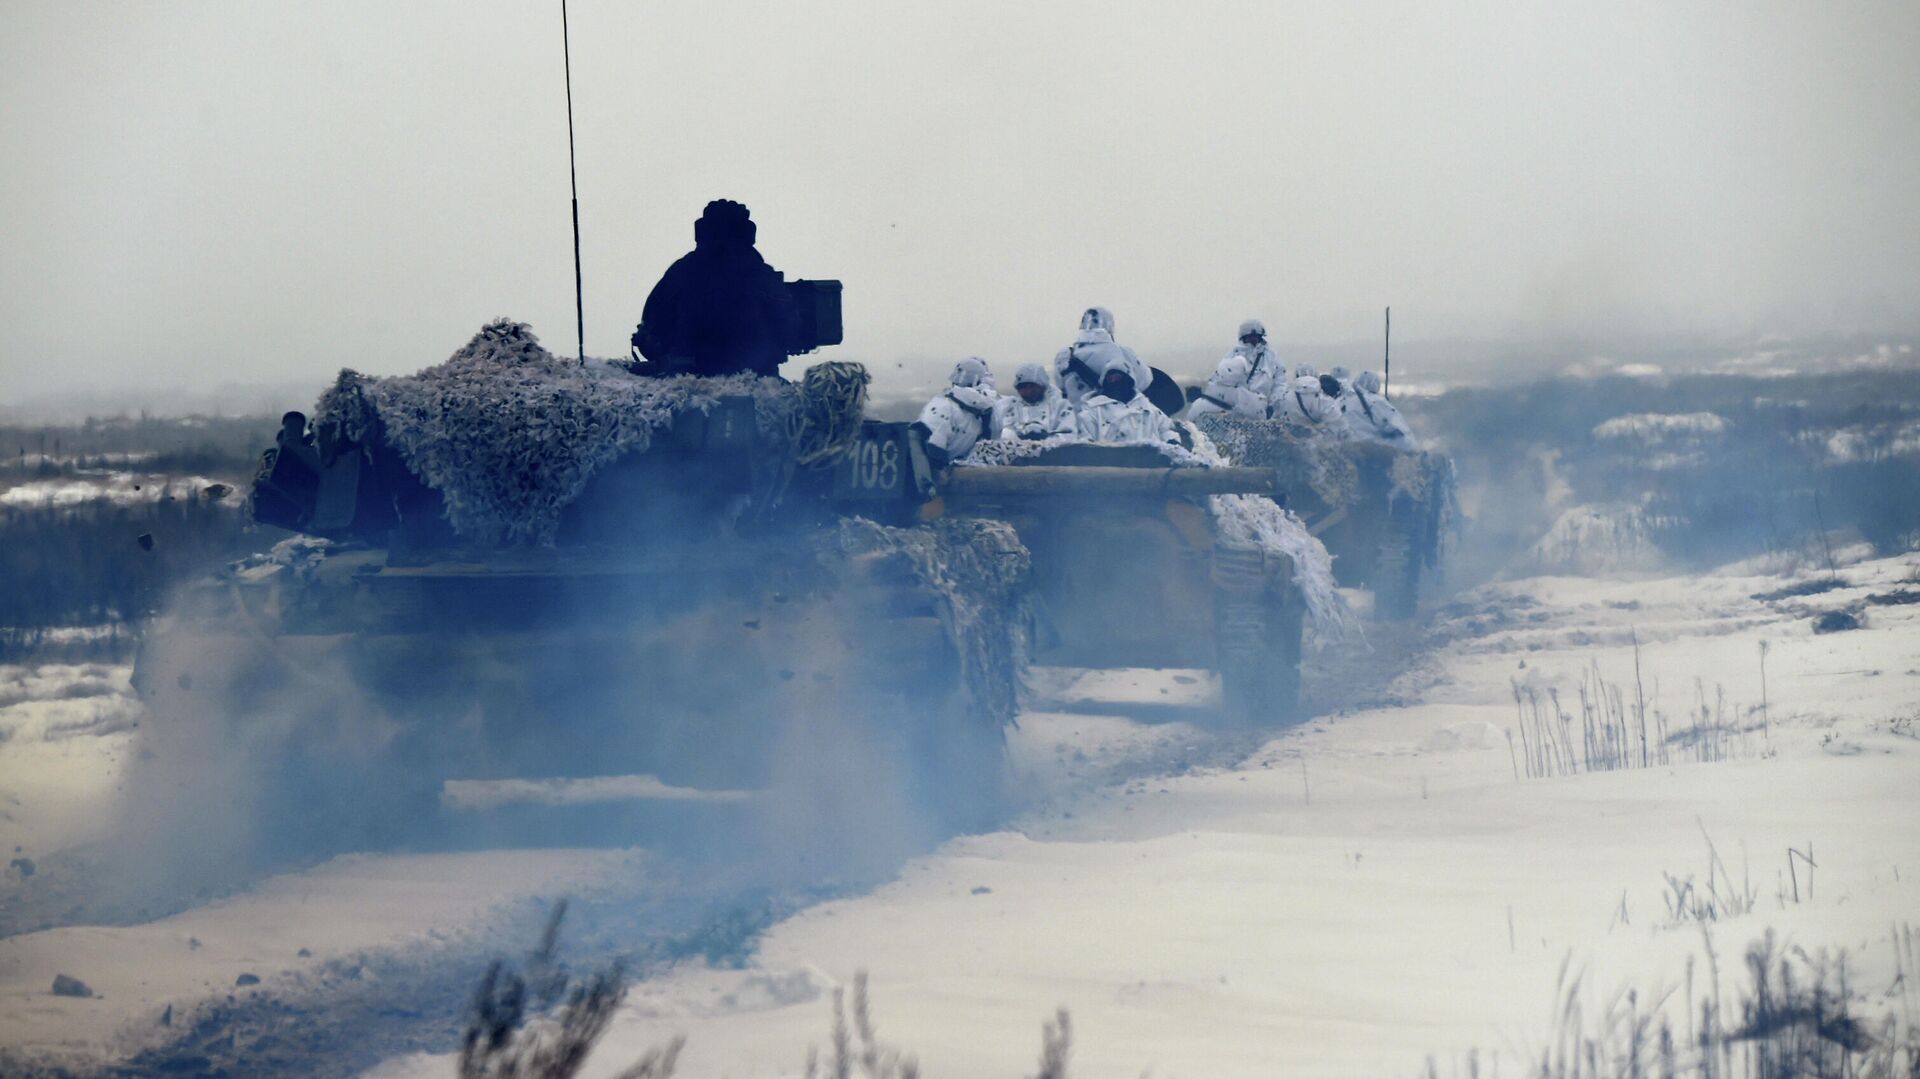 Ukrainian servicemen on armored personal carriers (APC) take part in brigade tactical exercises with combat shooting near Goncharivske willage, Chernihiv region, not far from the border with Russia on December 3, 2018 - Sputnik International, 1920, 02.02.2022